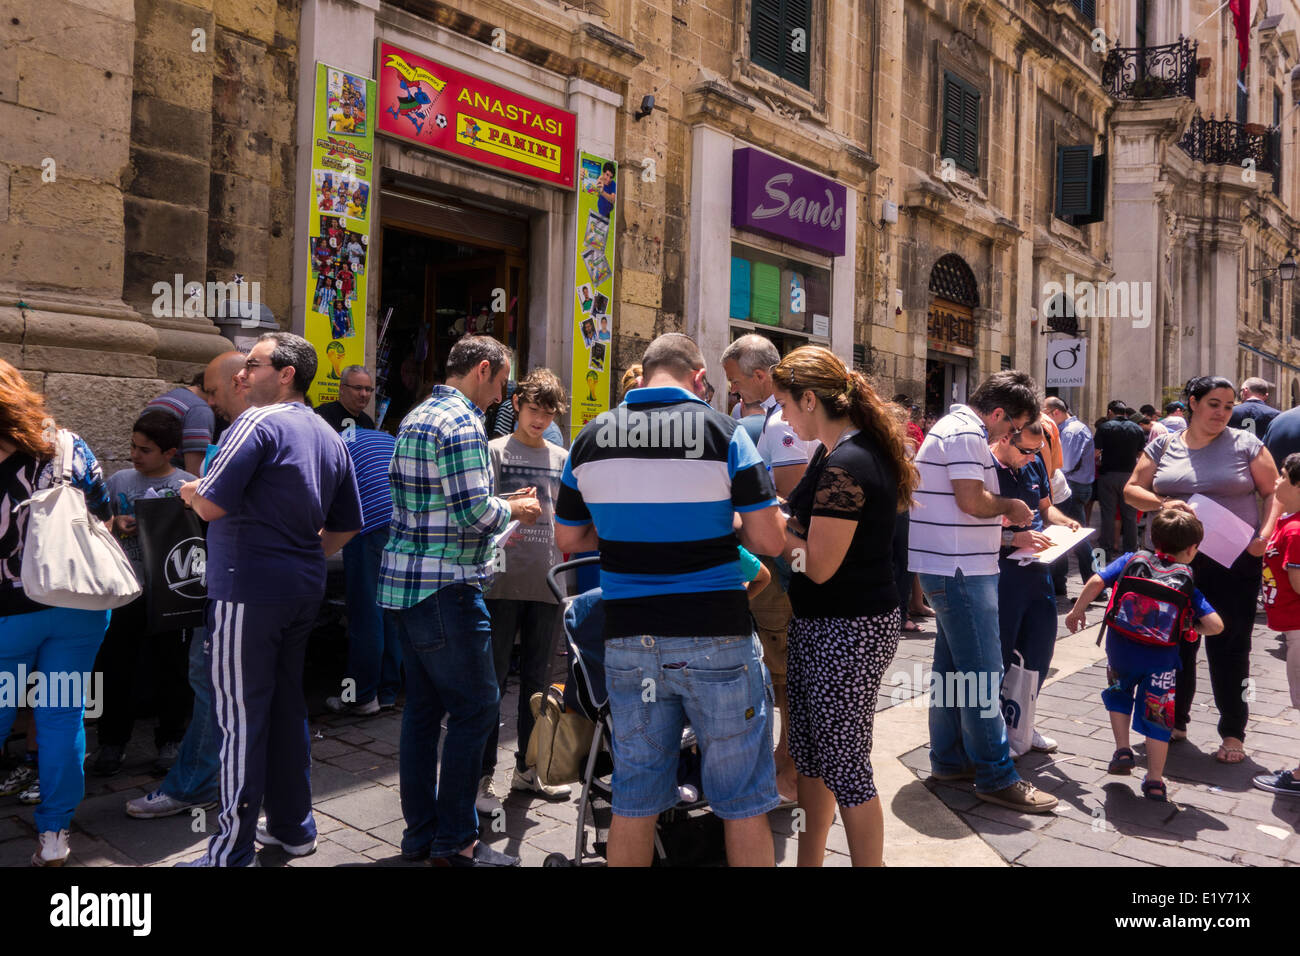 Saturday morning outside a Panini shop. Children and people. Stock Photo